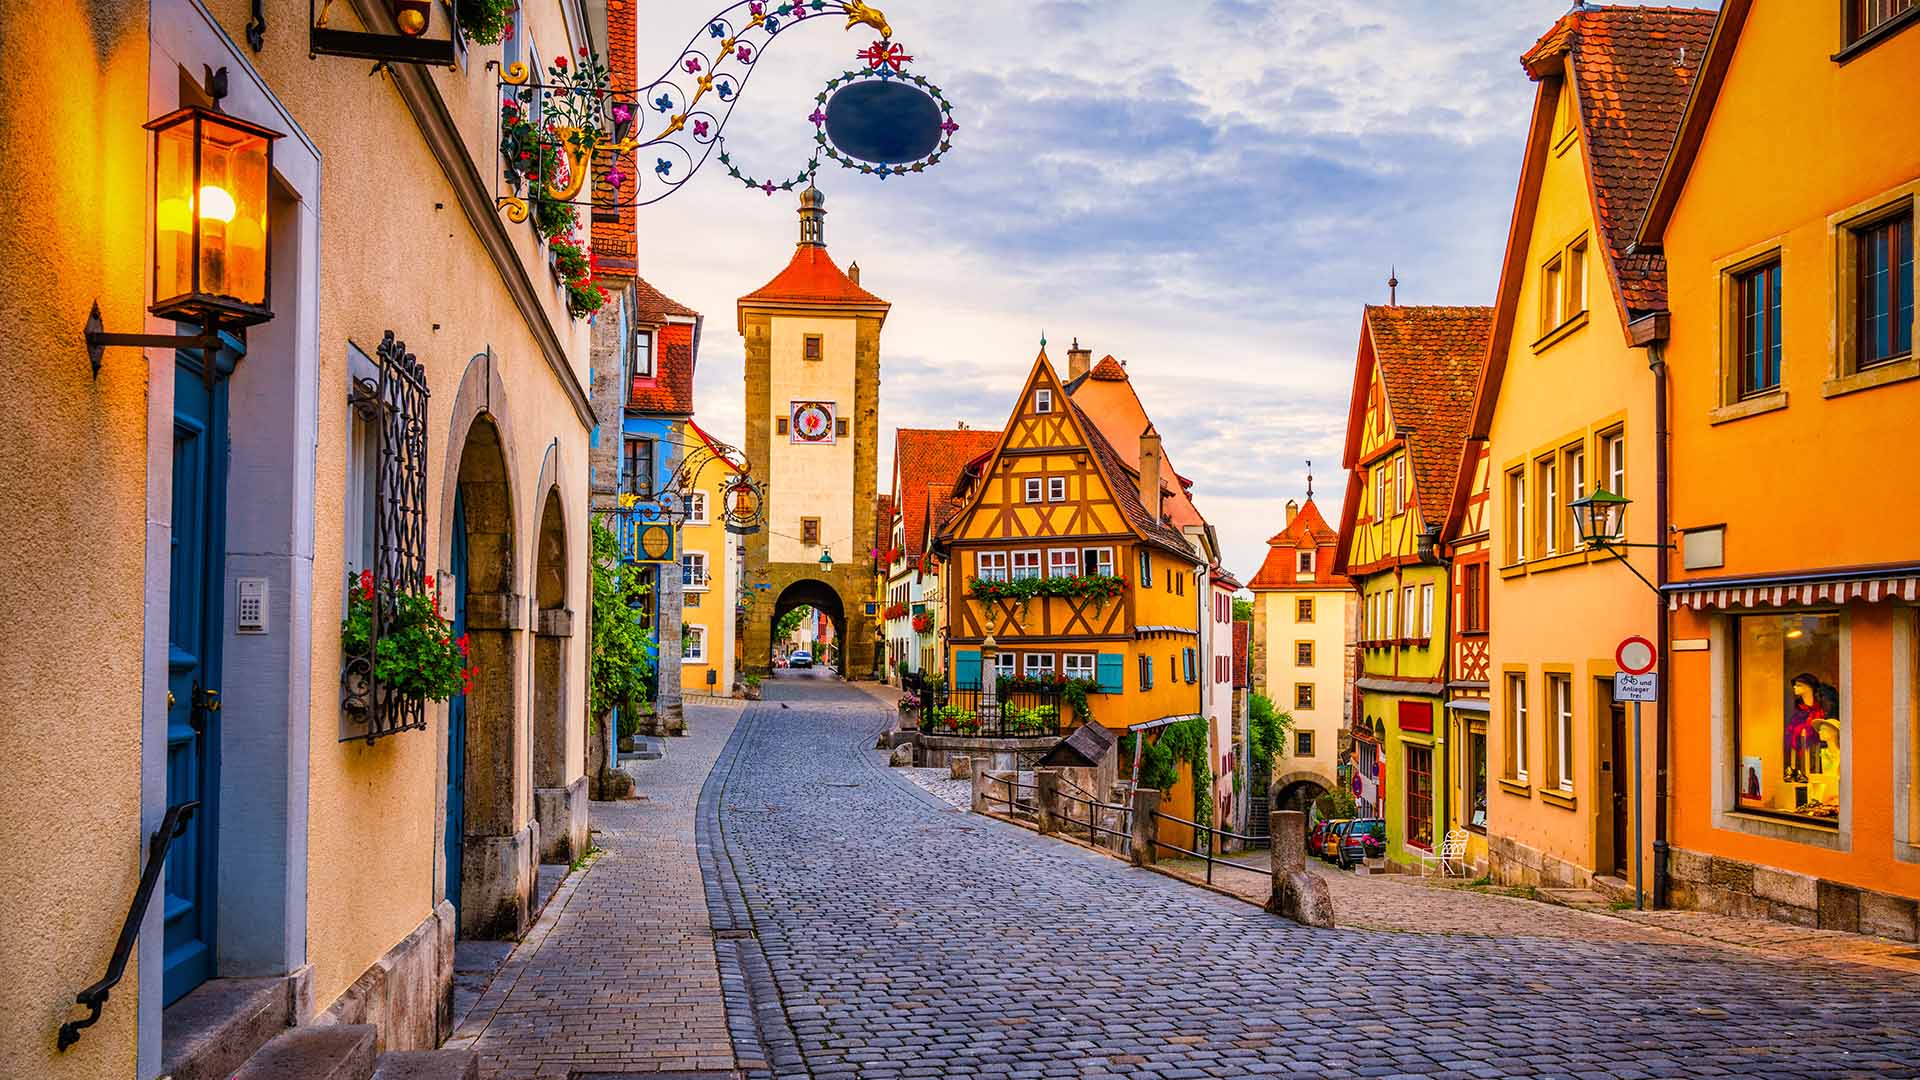 Morning View Rothenburg ob der Tauber, Germany Beautiful Towns Around the World